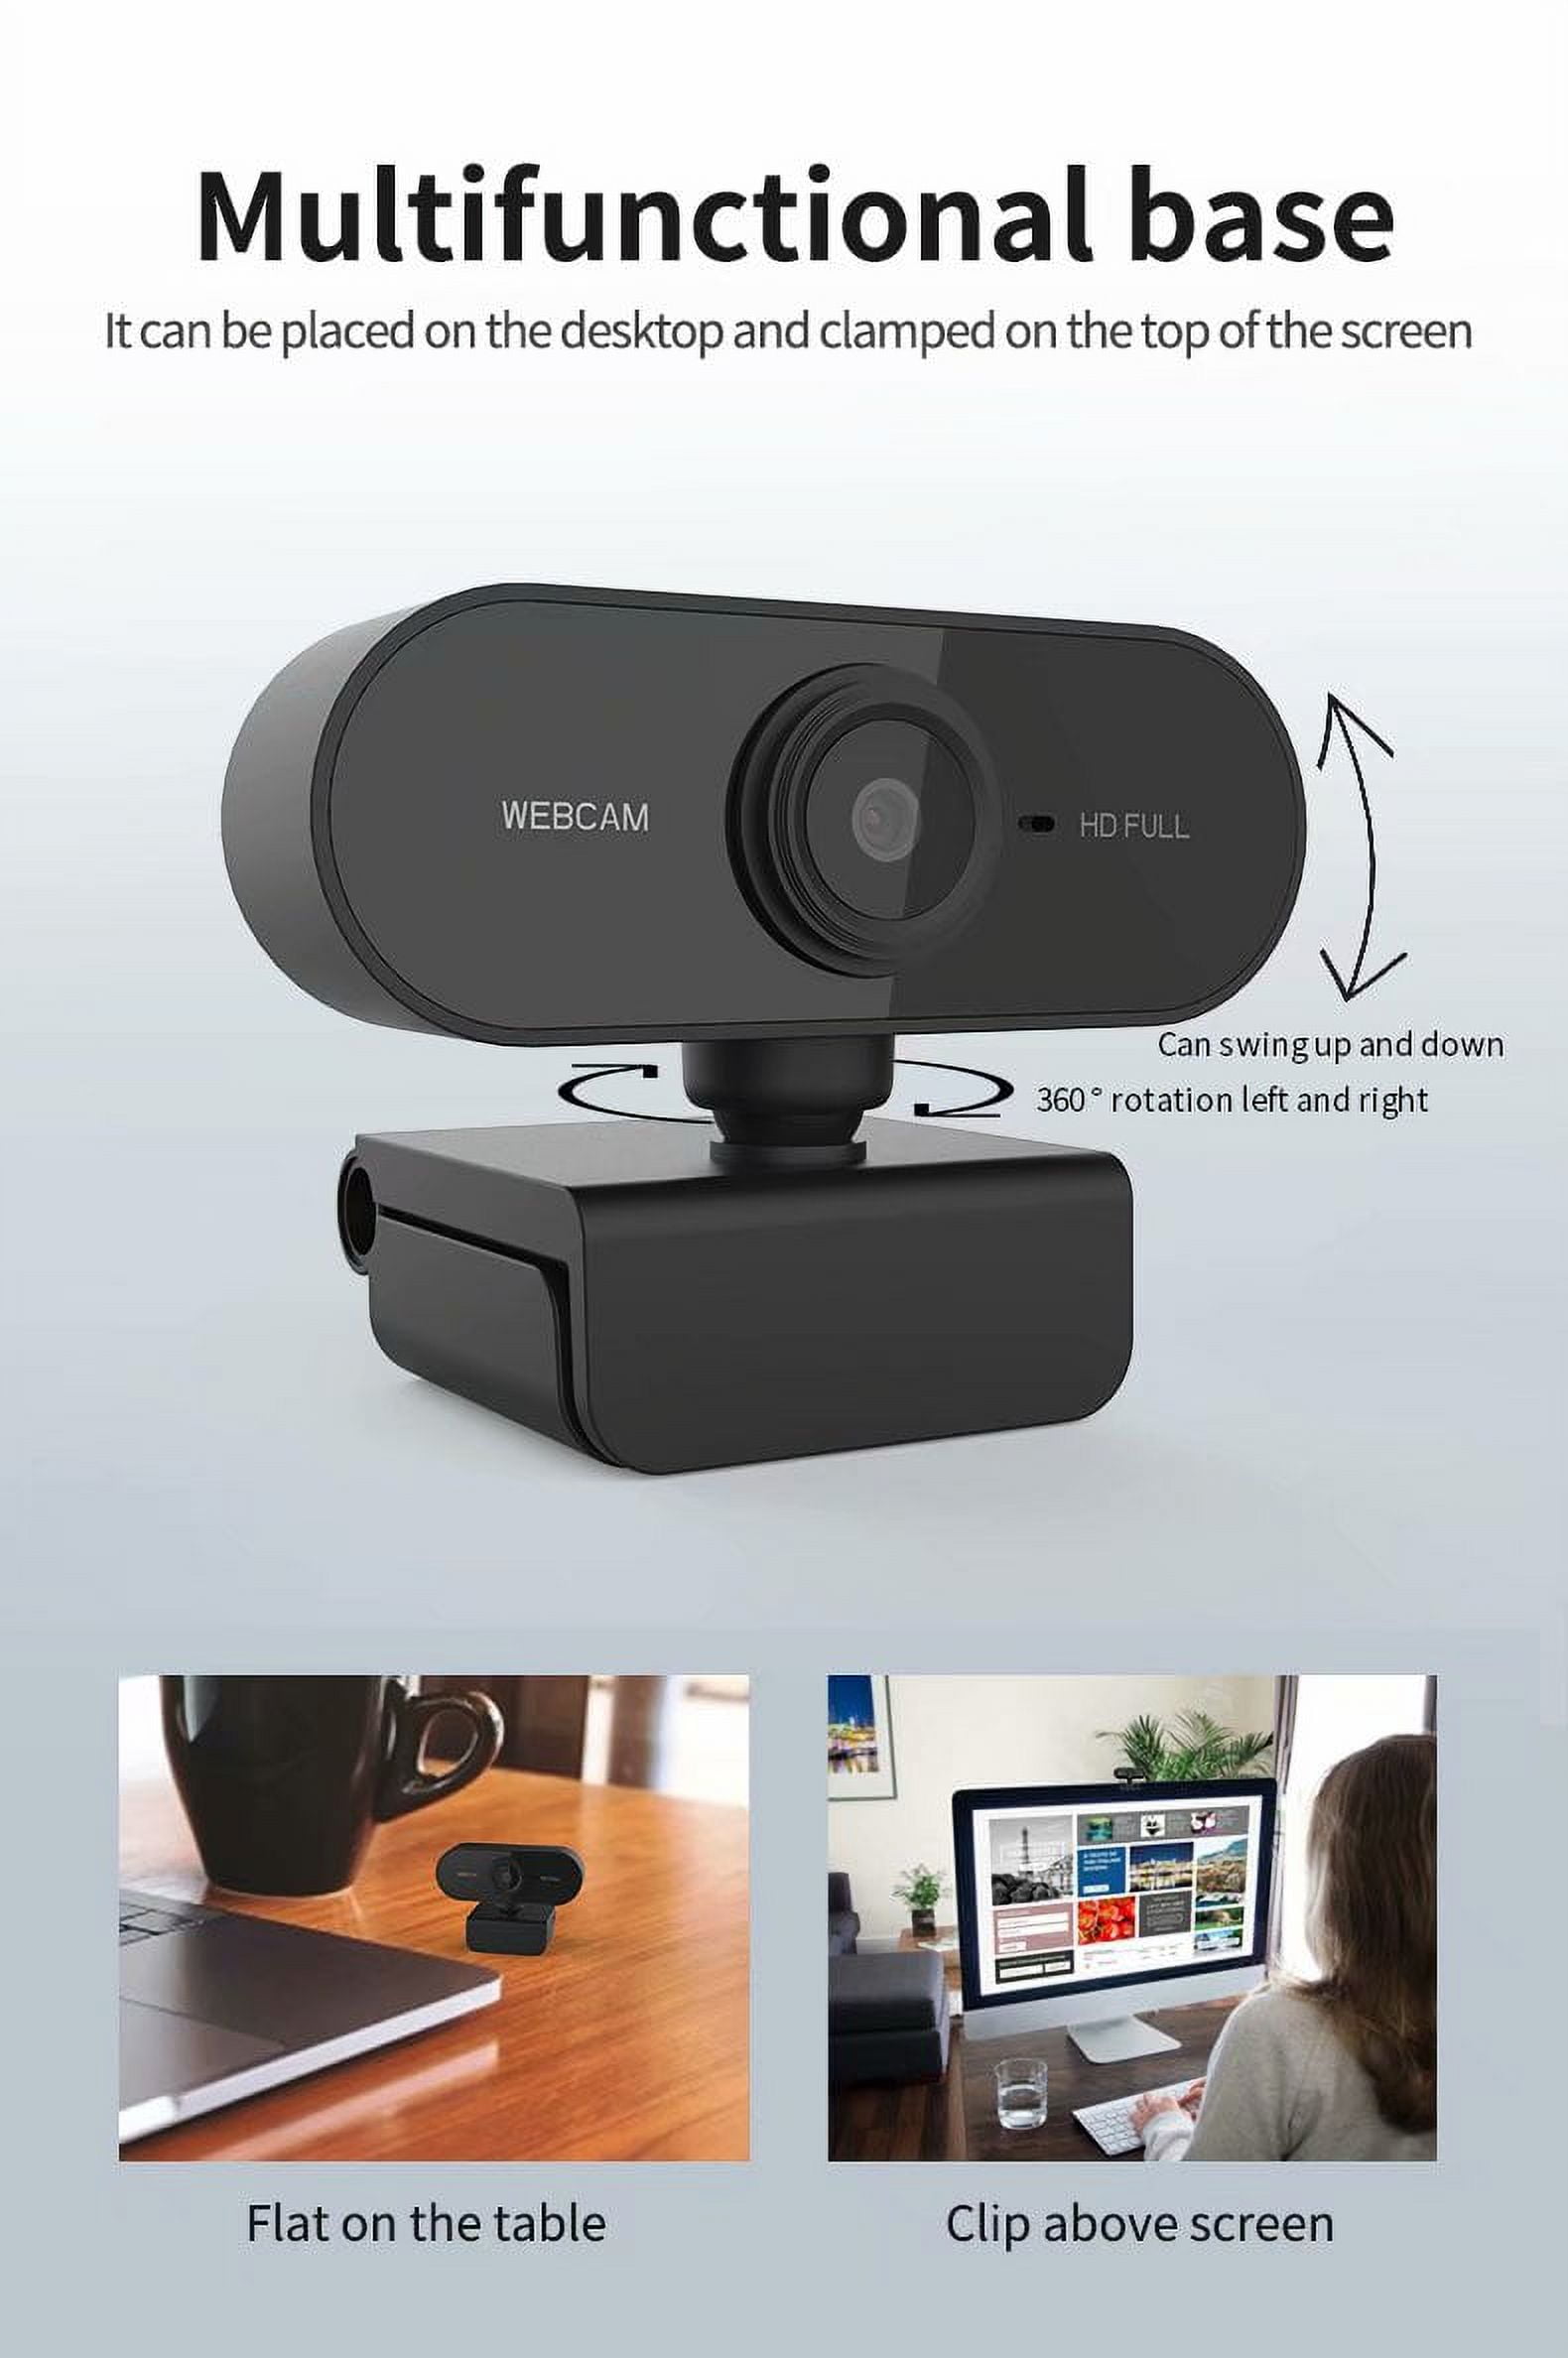 Full HD Webcam 1080P with Microphone,120 Degrees Wide Angle Business  Webcams Streaming USB Web Camera - W302 Computer Camera for Video Calling